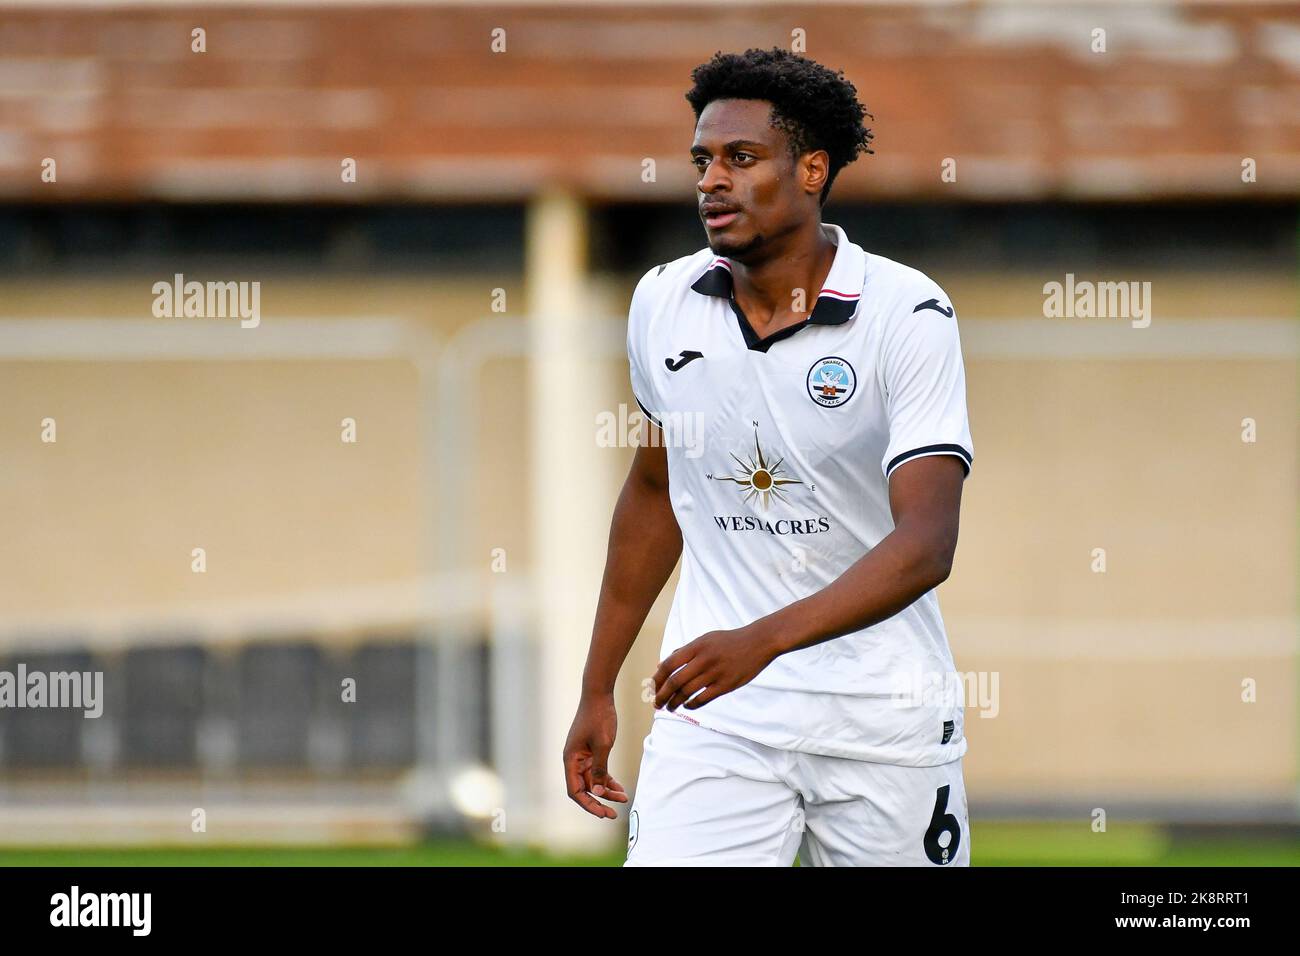 Swansea, Wales. 24 October 2022. Nathanael Ogbeta of Swansea City during  the Professional Development League game between Swansea City Under 21 and  Millwall Under 21 at the Swansea City Academy in Swansea